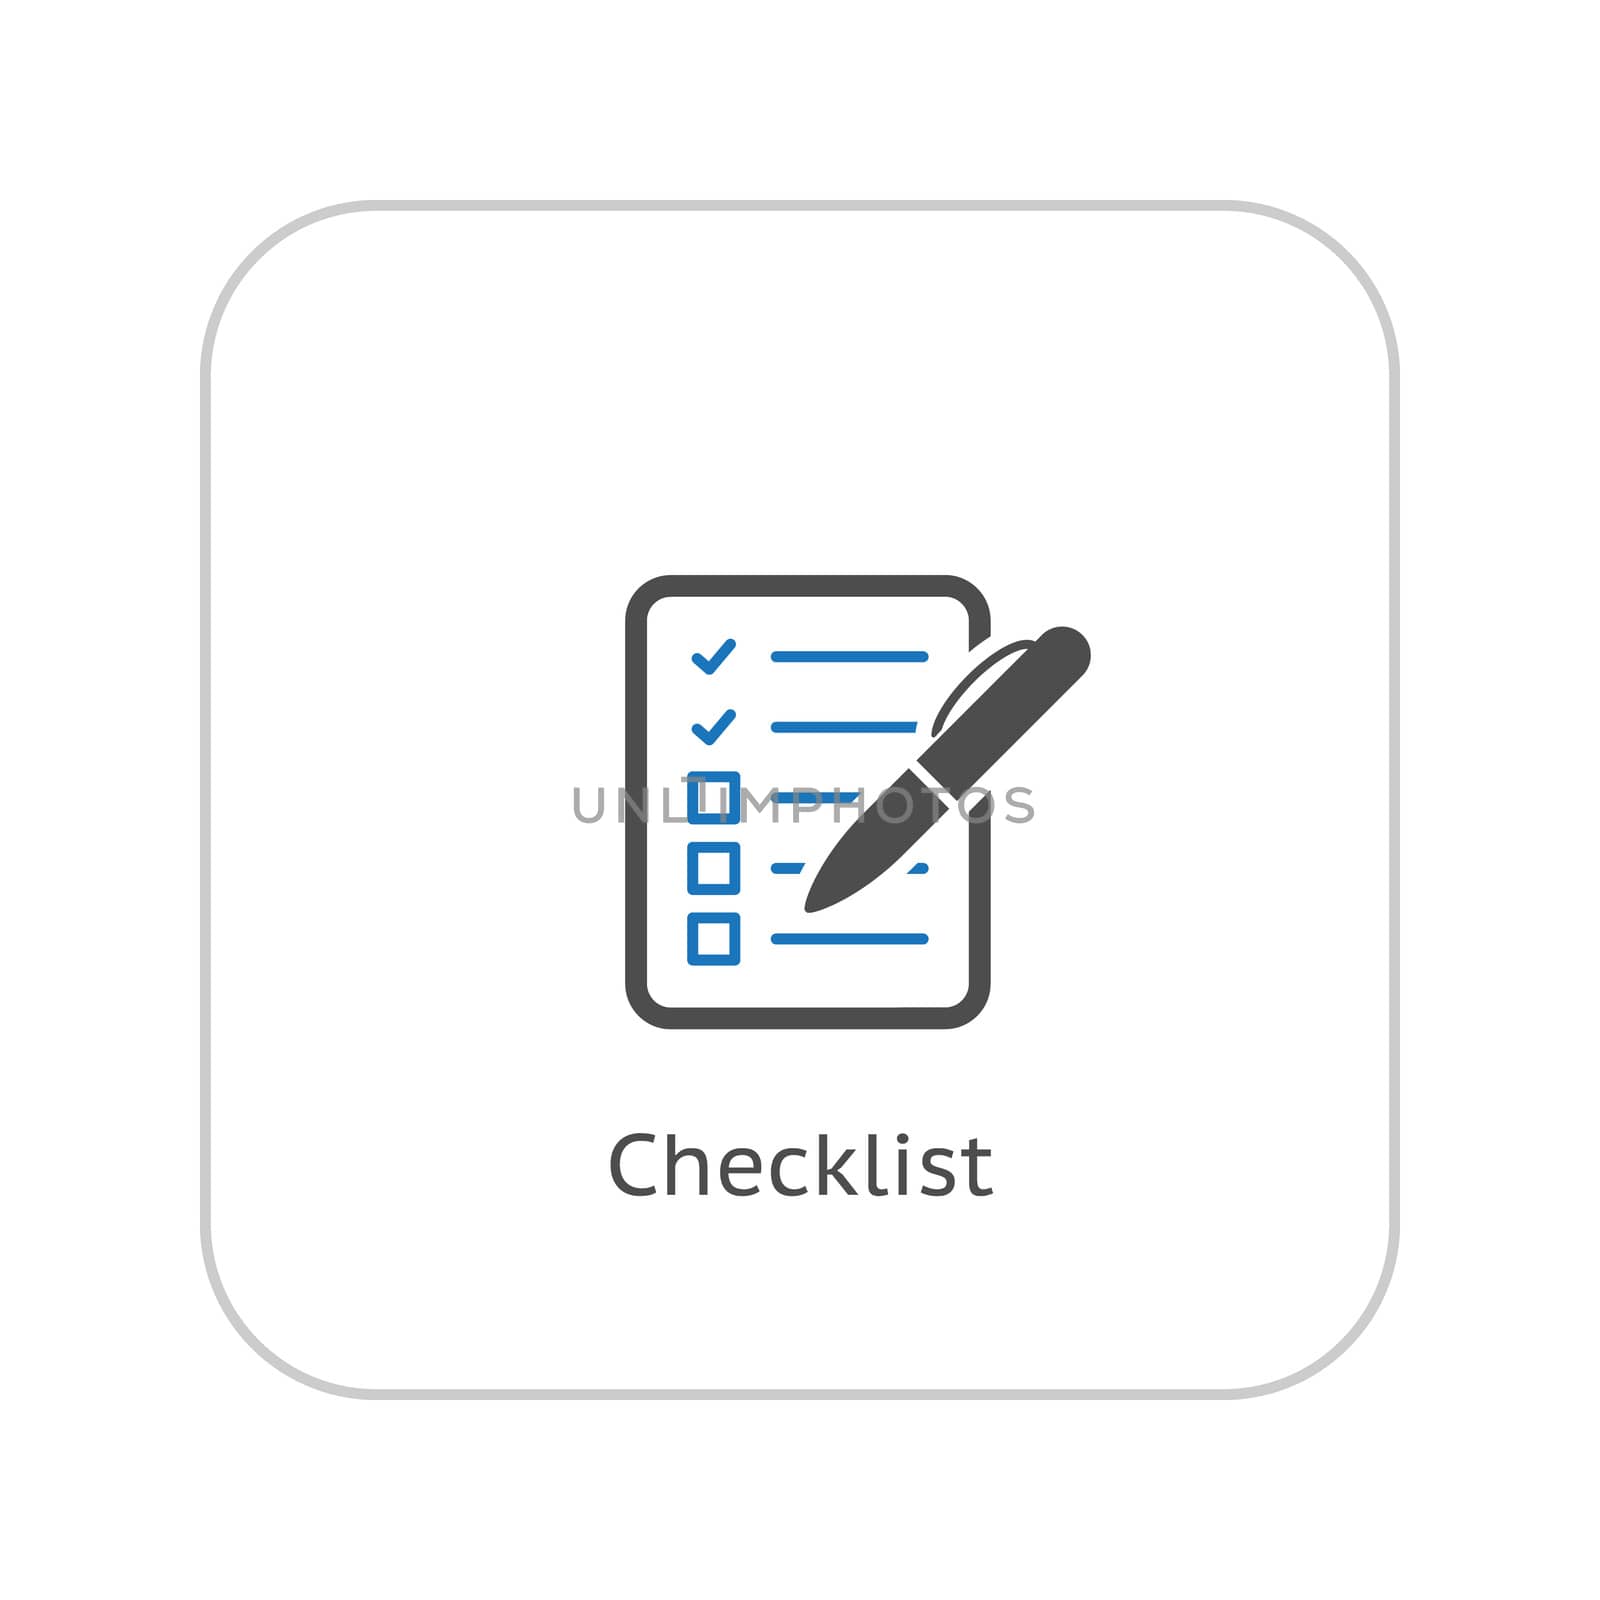 Check List Icon. Business Concept. Flat Design. Isolated Illustration.